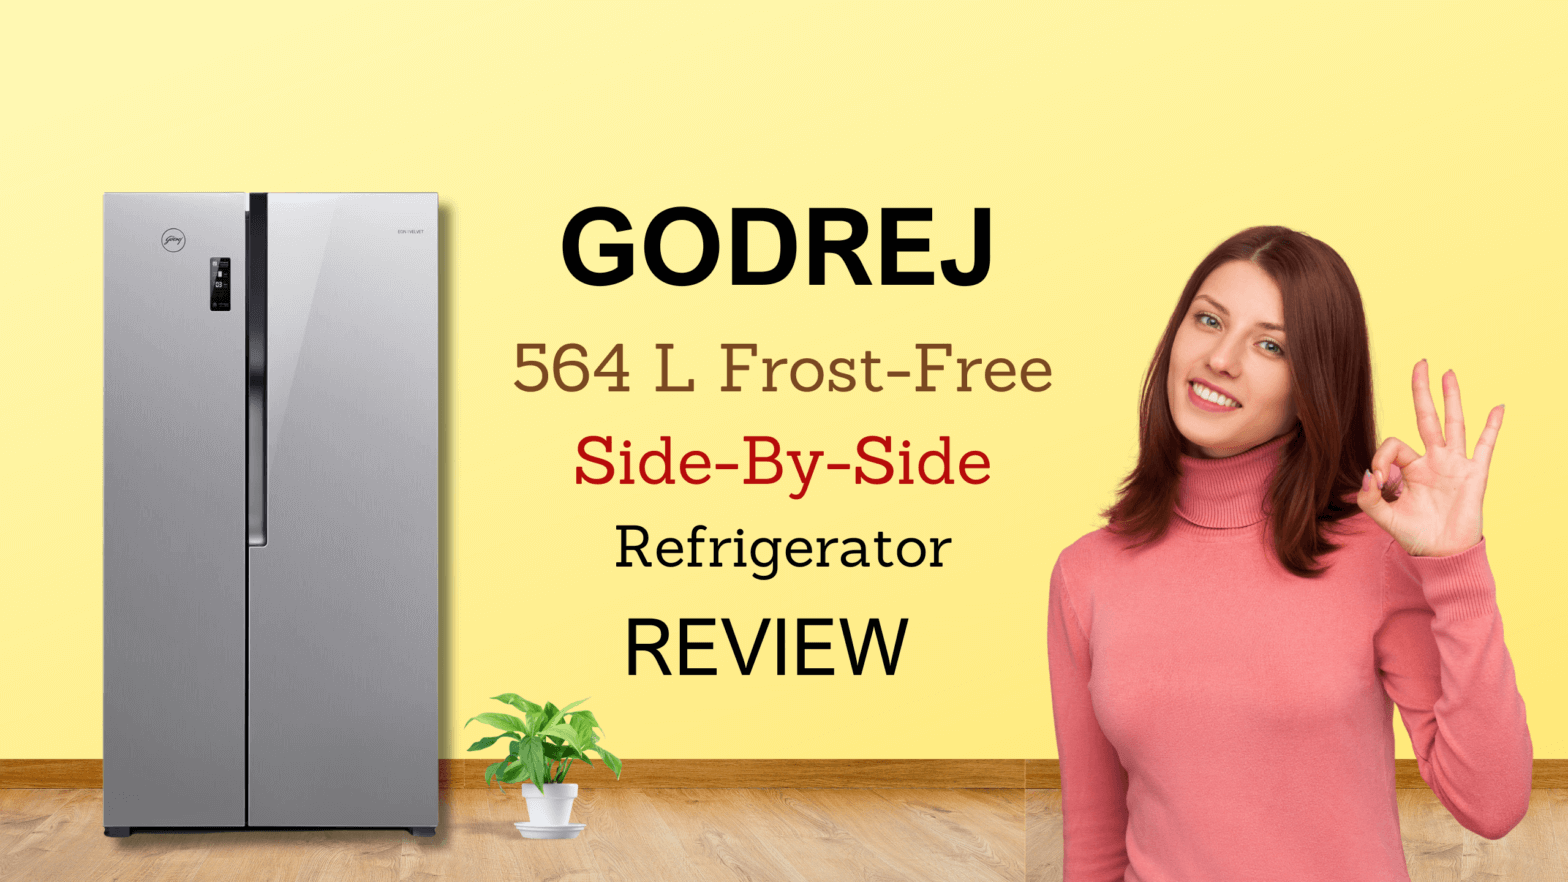 Godrej 564 L Frost Free Side-By-Side Refrigerator Review